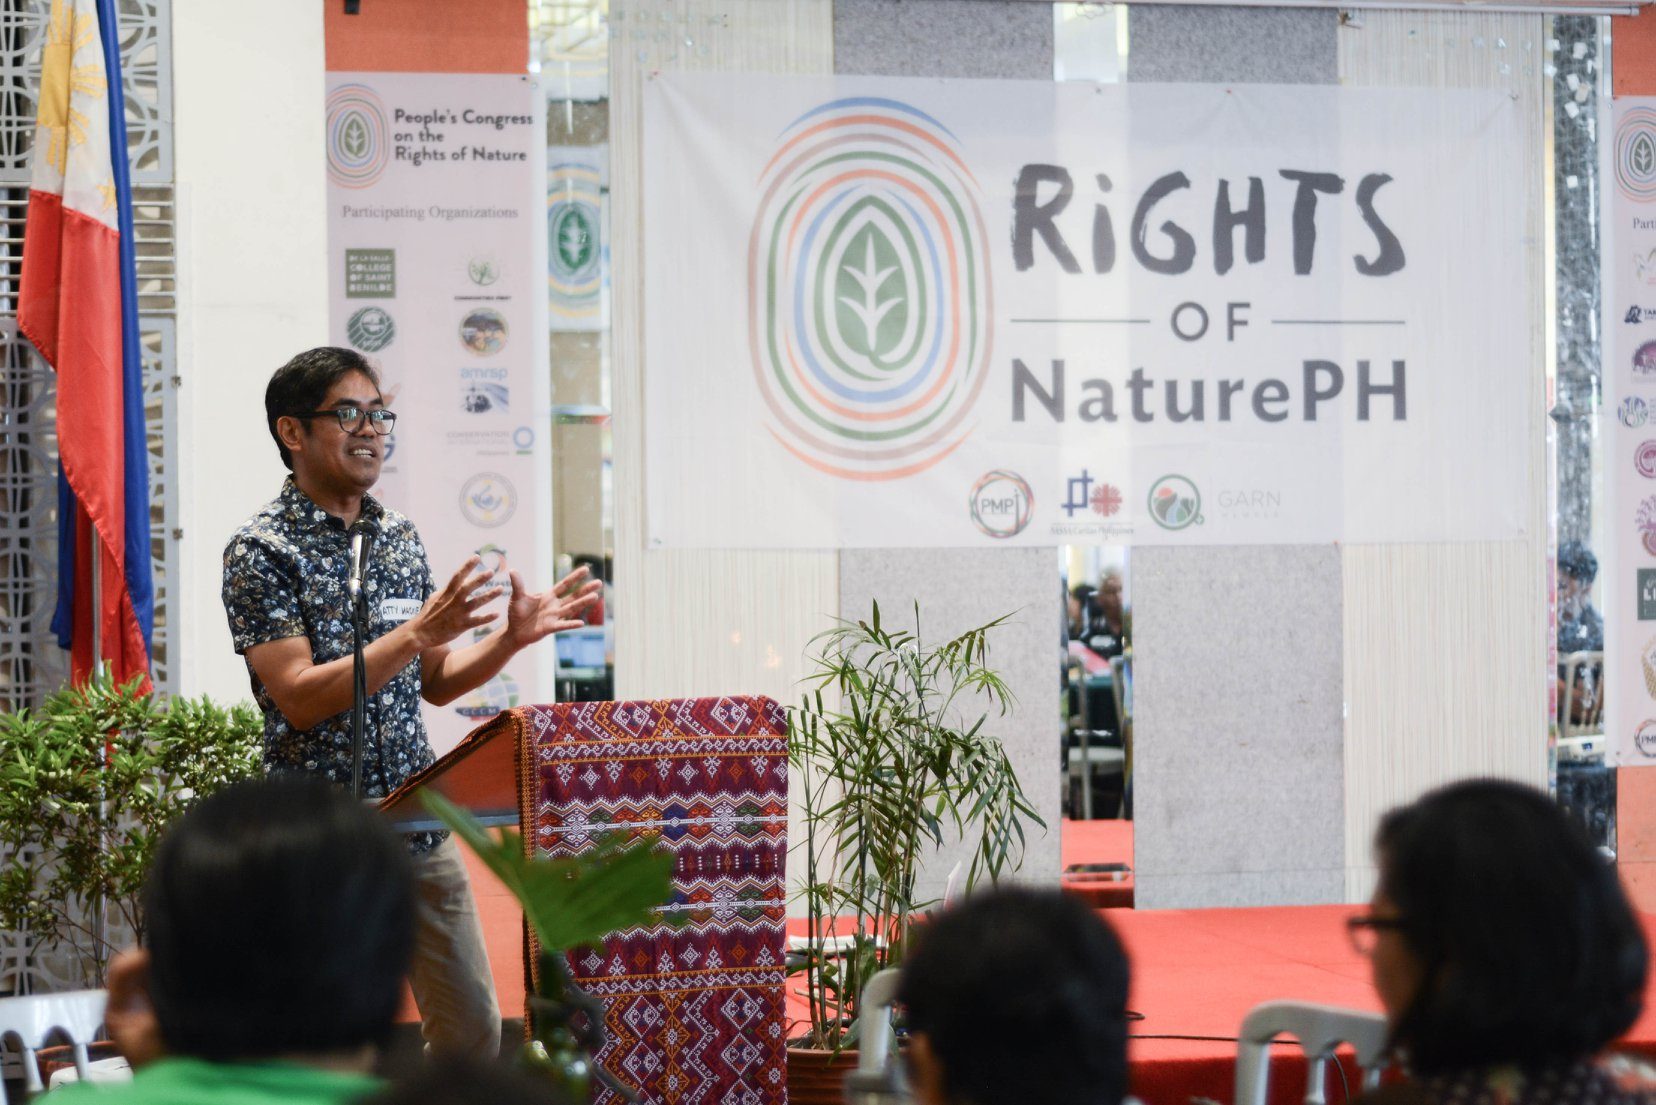 RIGHTS OF NATURE. Environmental lawyer Mario Maderazo addresses the People's Congress on the Rights of Nature in Quezon City on July 20, 2019. Photo from: PMPI, Salakyag para sa Sangnilikha Facebook page  